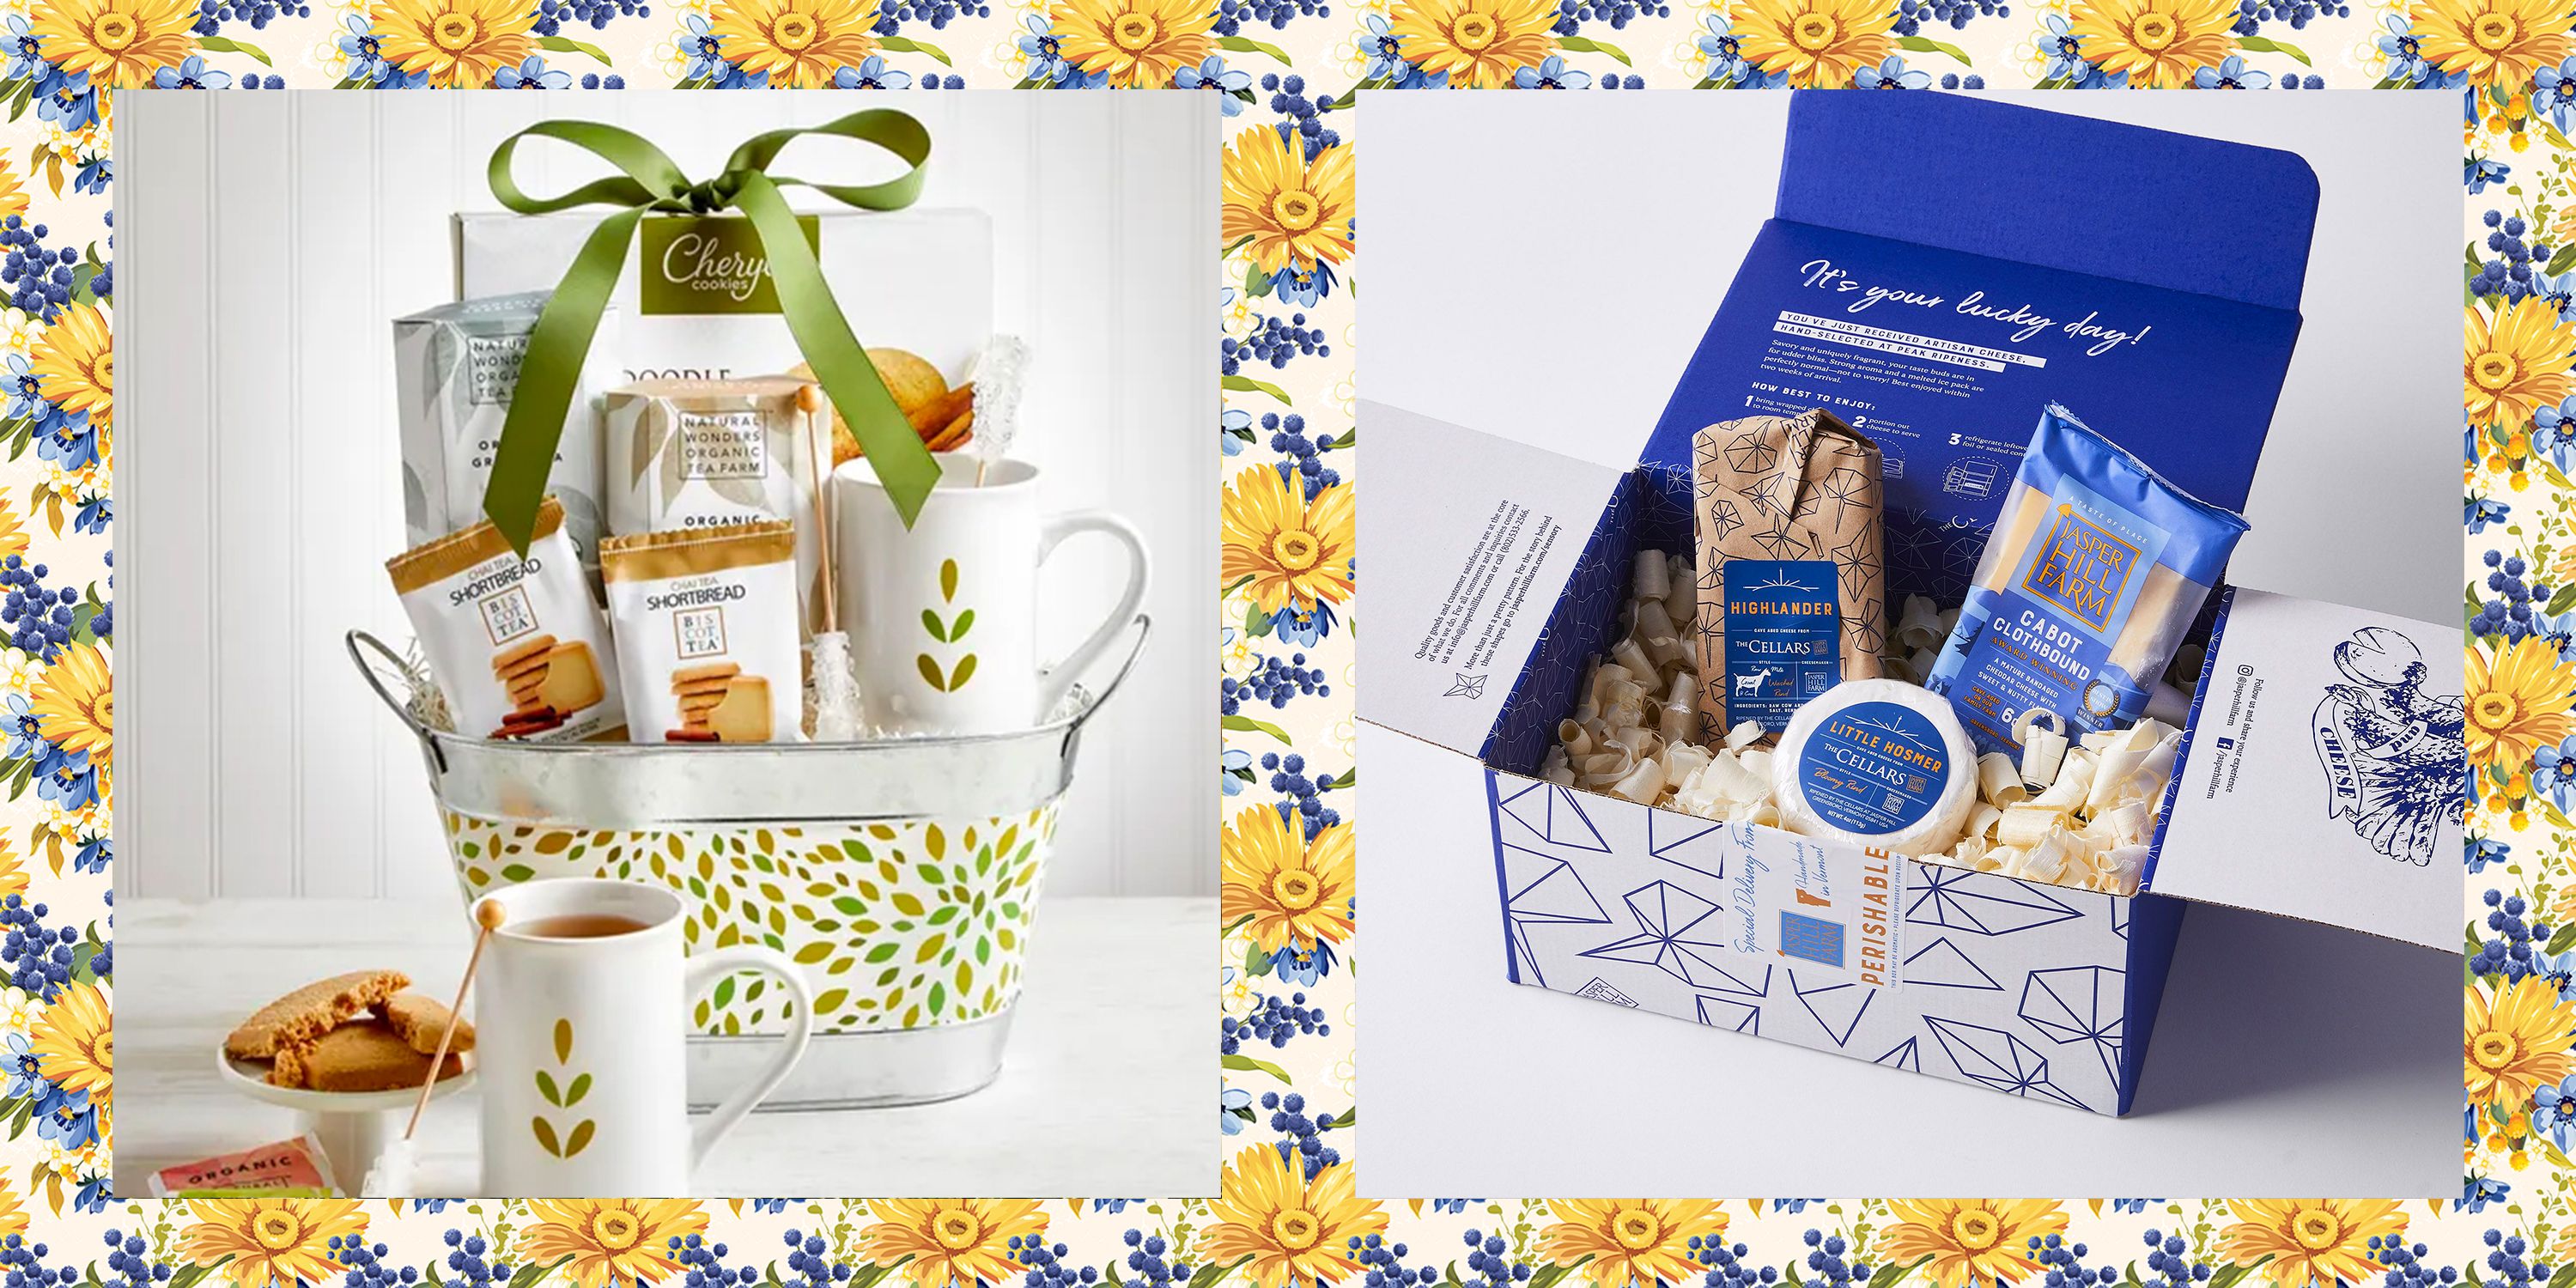 food gift baskets for women